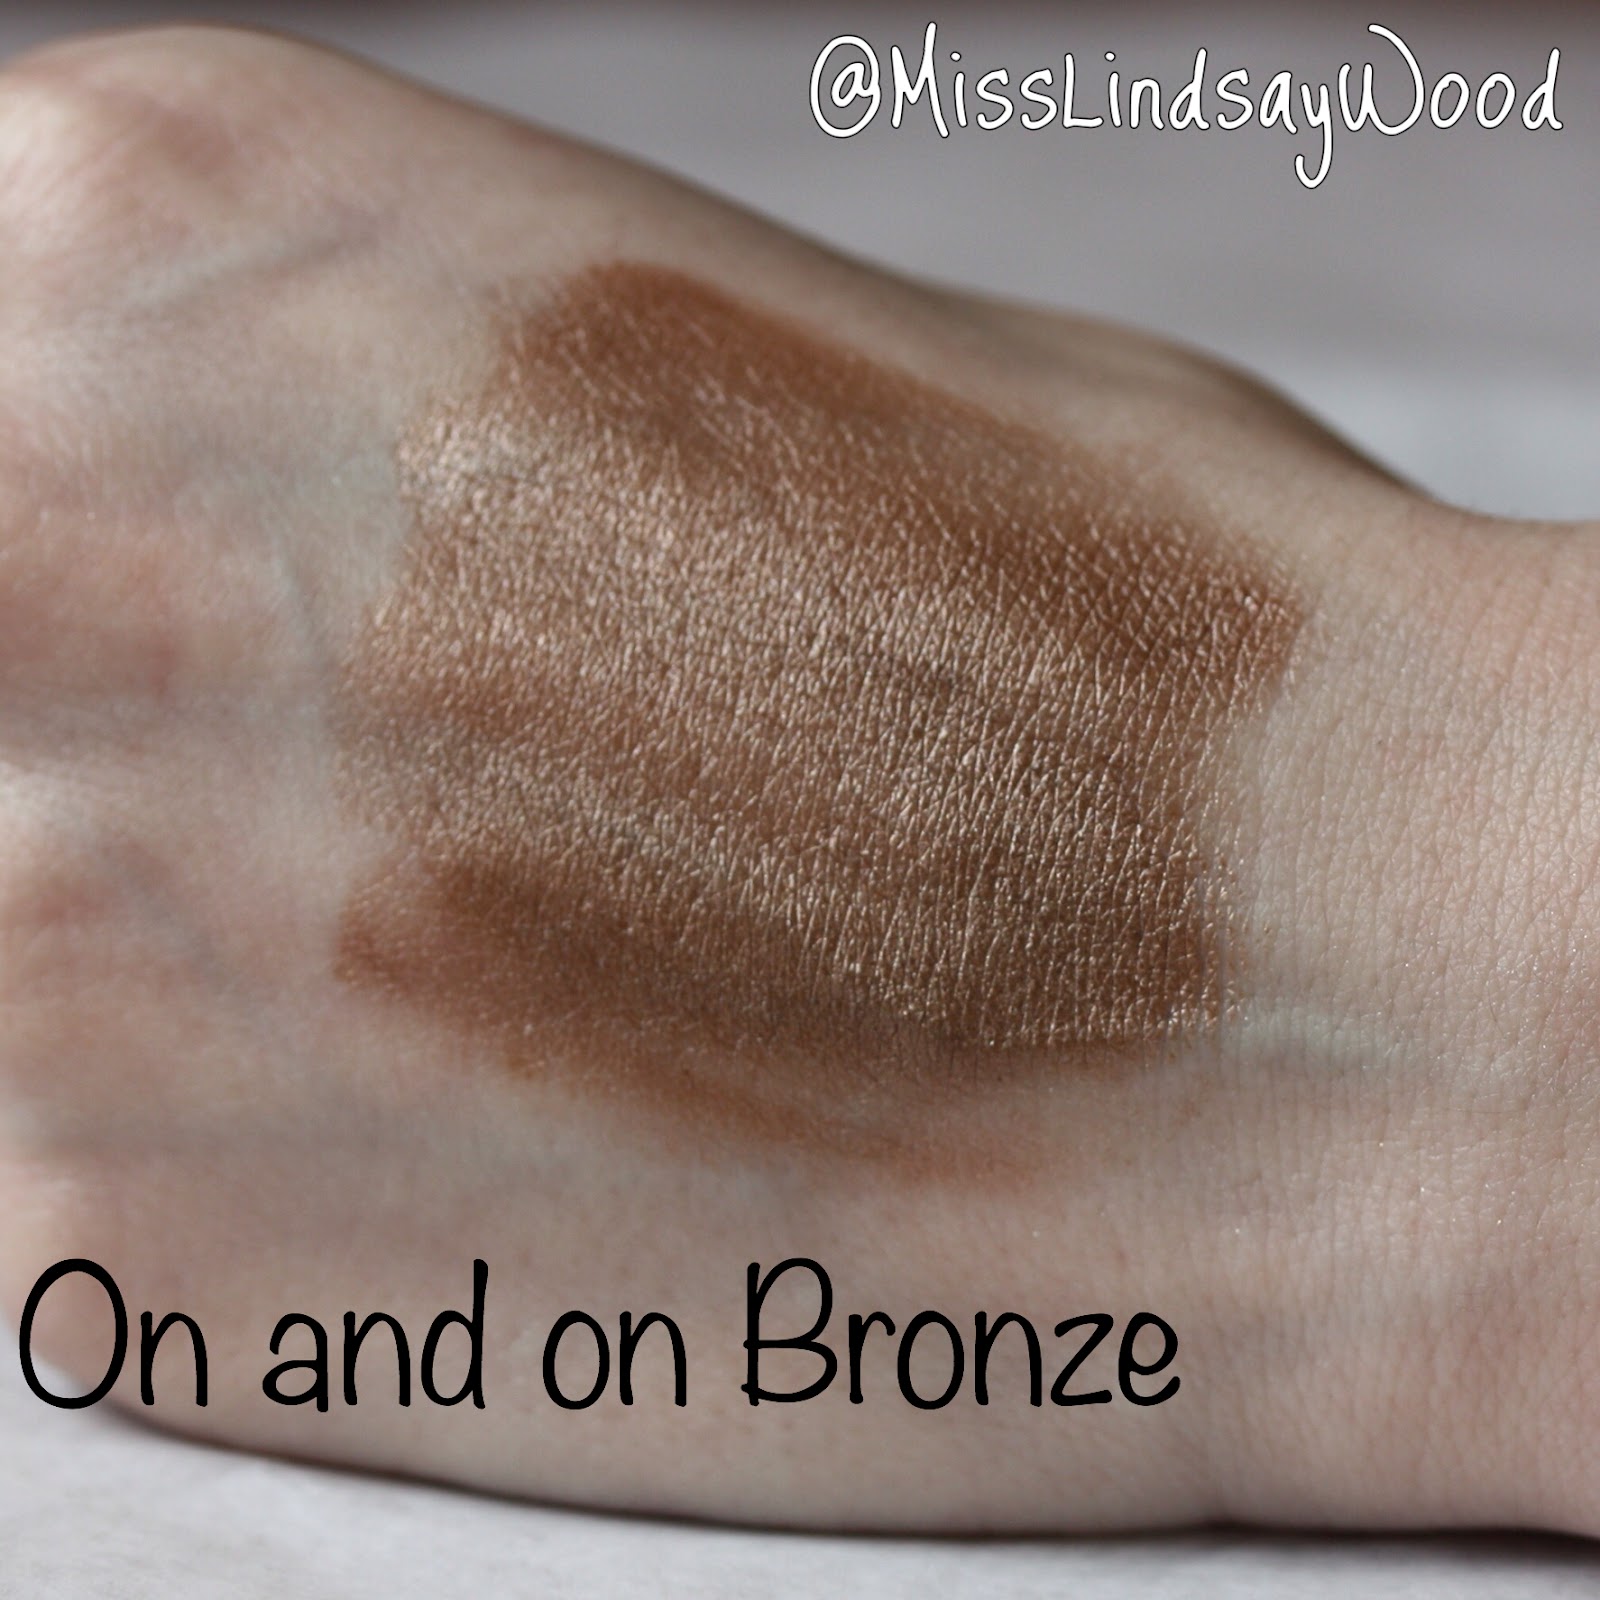 Maybelline Color Tattoo On and on Bronze